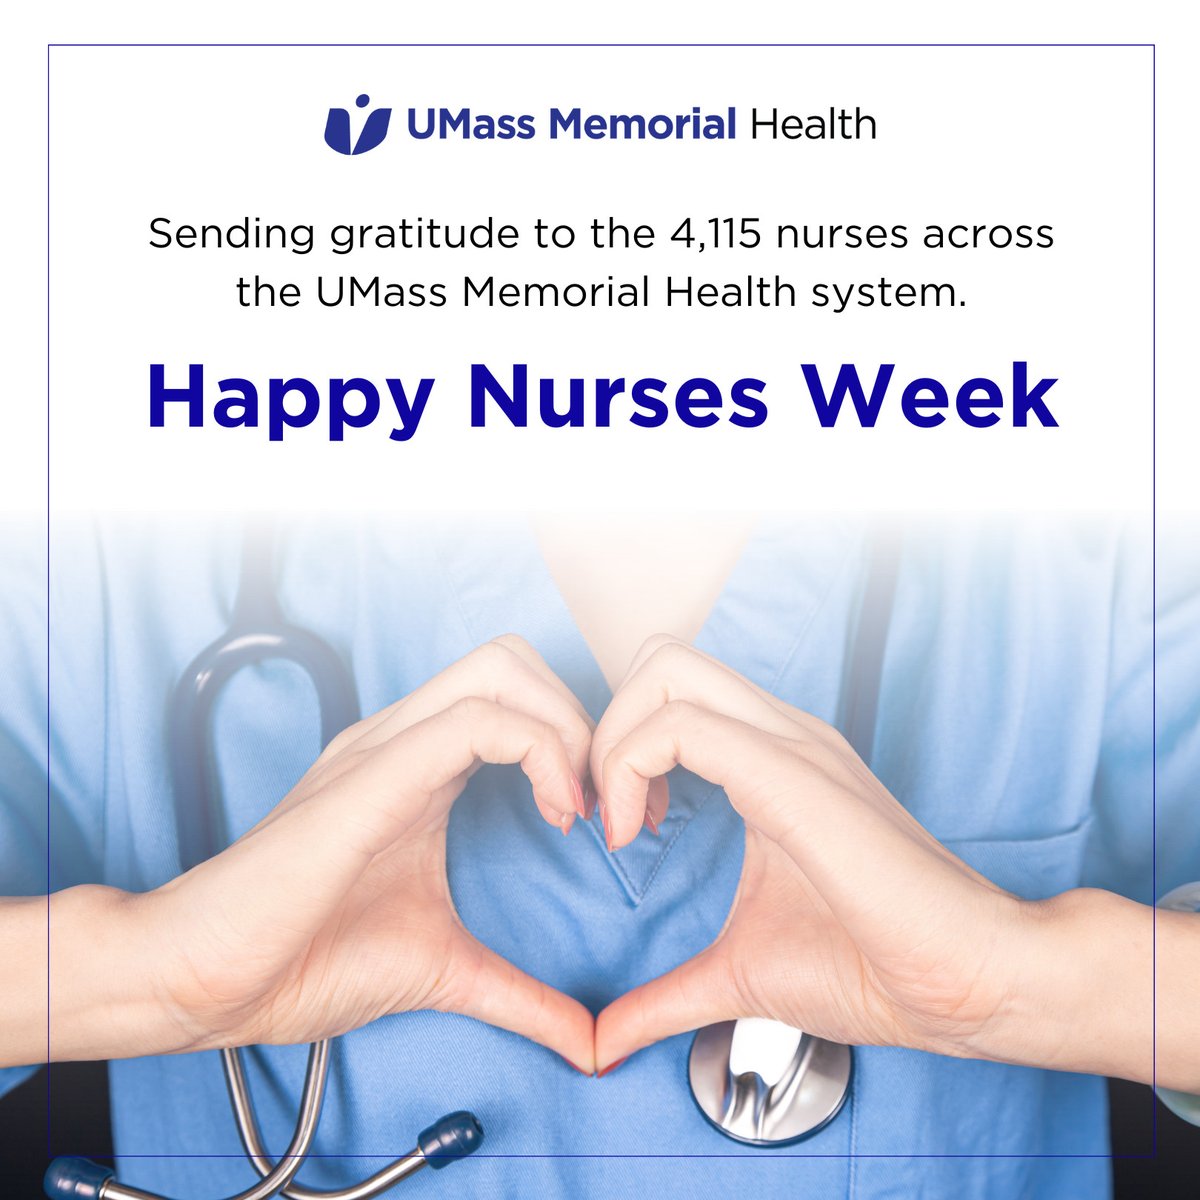 #UMassMemorialHealth is wishing all of our incredible, hardworking and dedicated nurses a very Happy #NursesWeek! Join us as we nod to nurses all week long — and extend our deepest gratitude for all they do. Comment below & shoutout a nurse you know and appreciate!